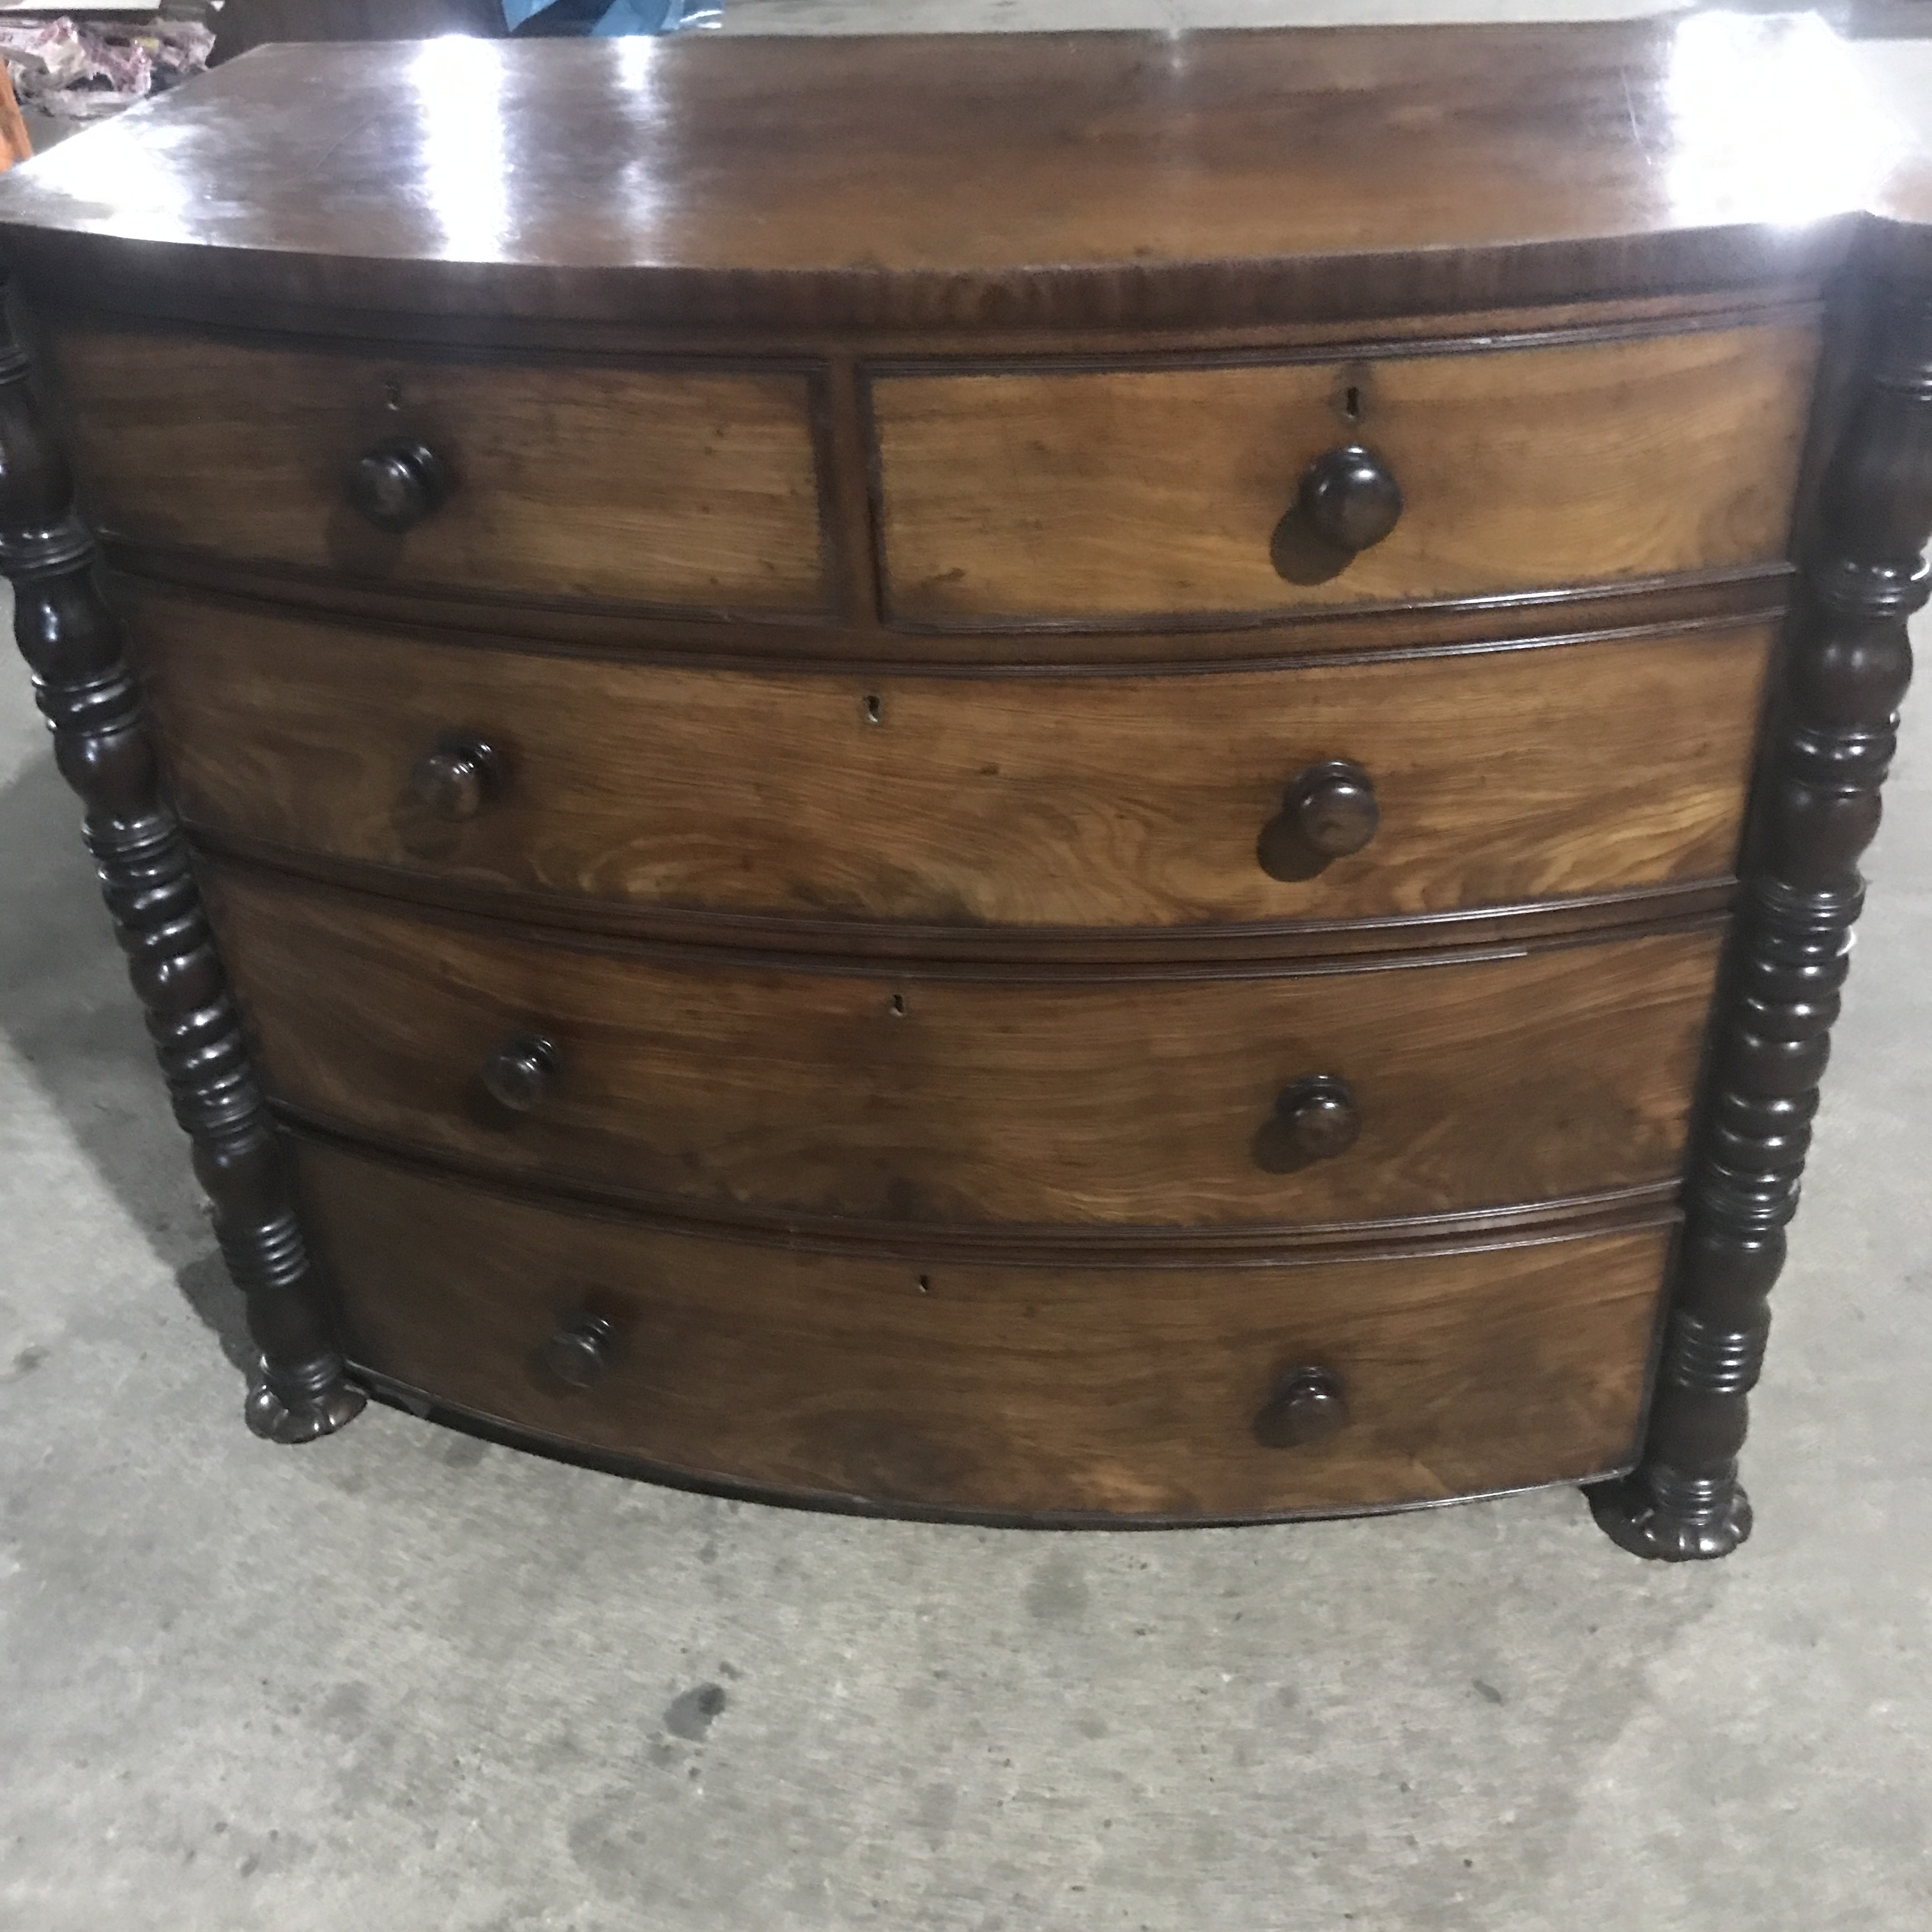 GOOD QUALITY ANTIQUE WILLIAM IV MAHOGANY BOWFRONT CHEST OF DRAWERS